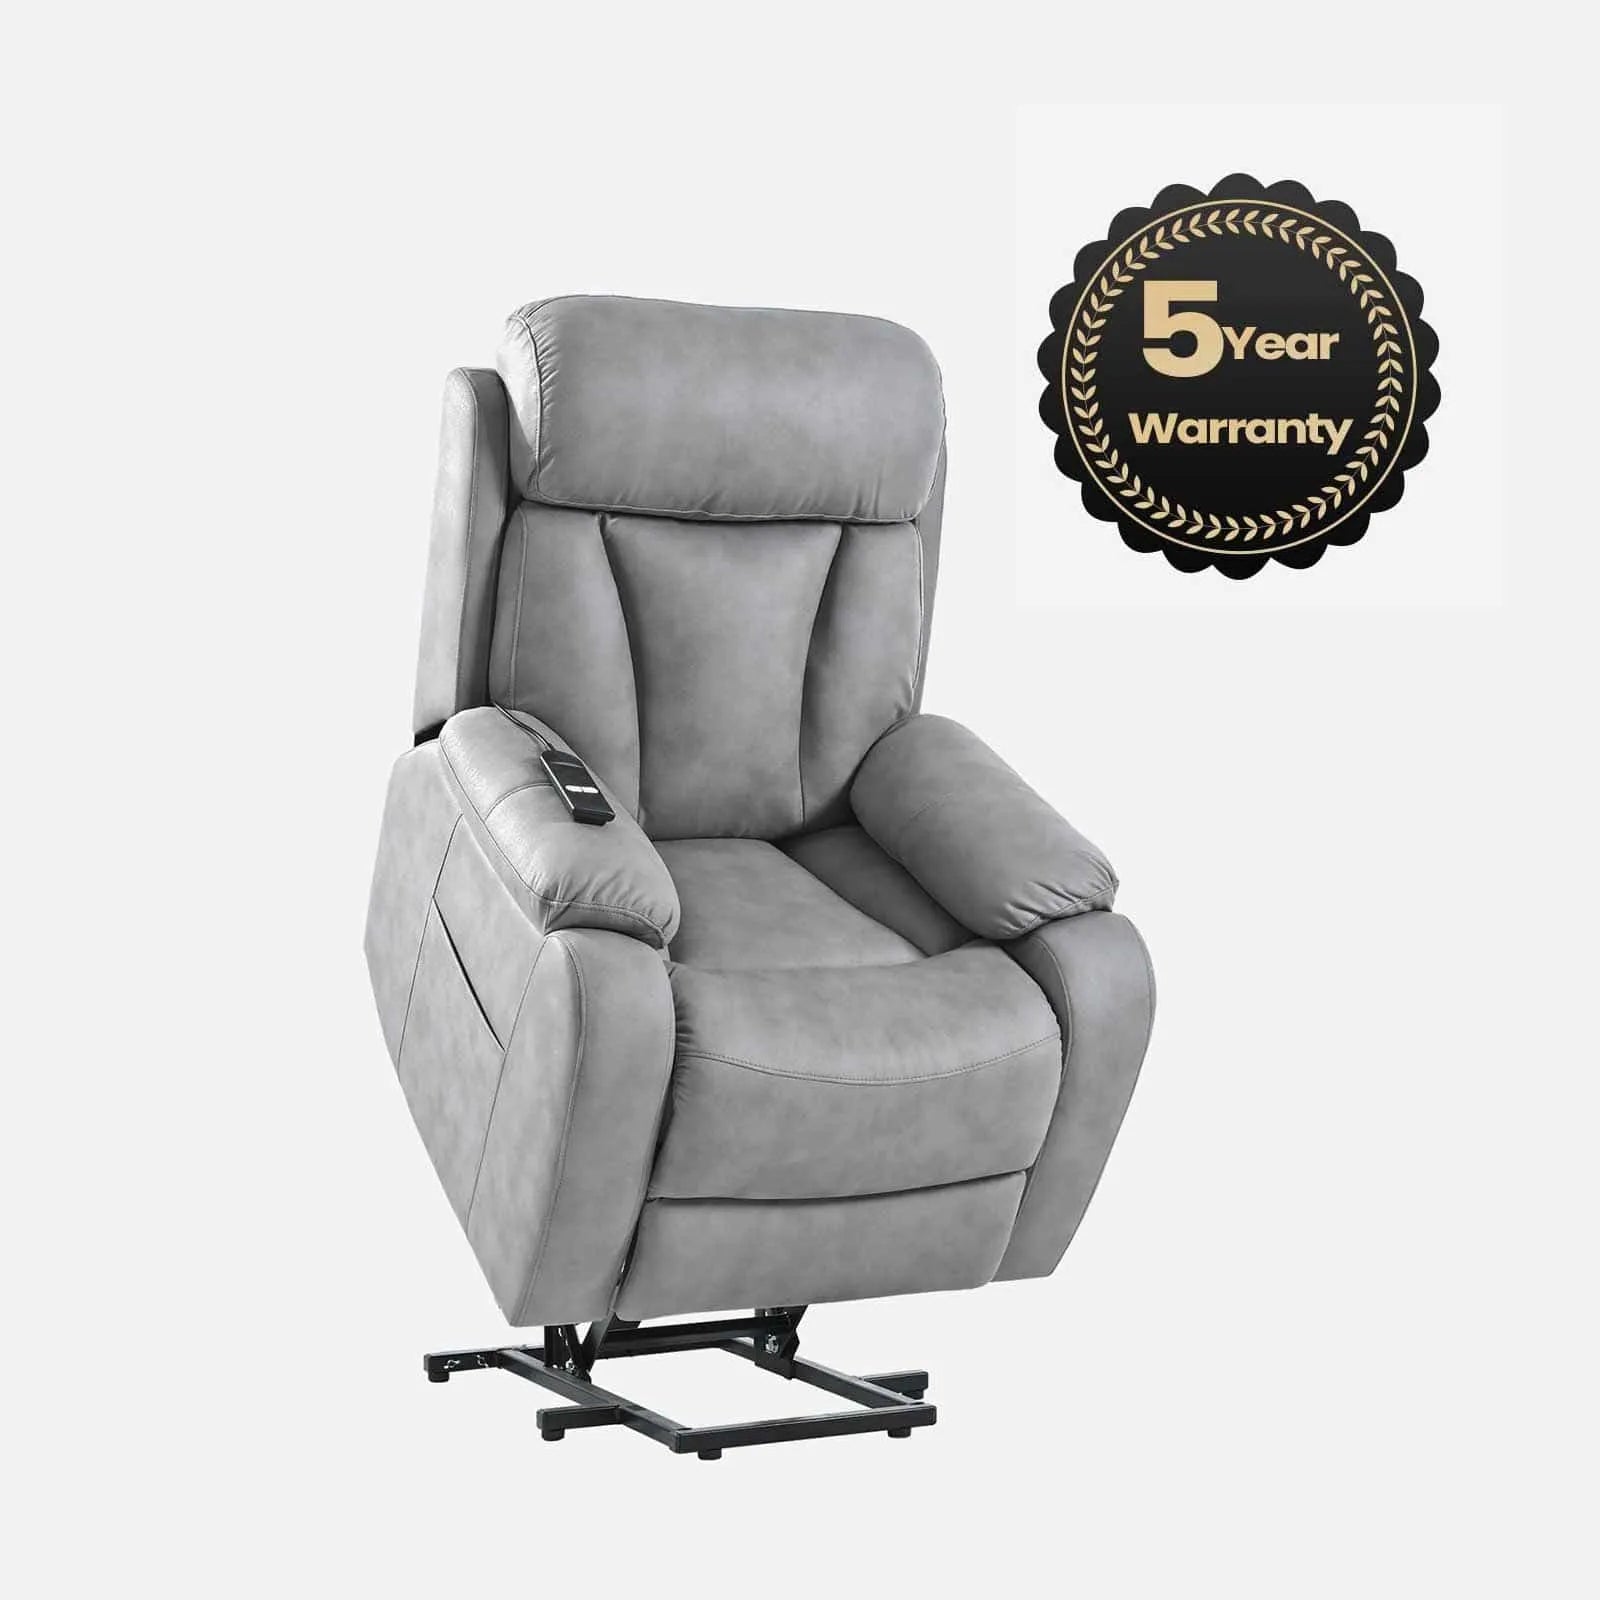 remote control lift recliner with 5 year warranty